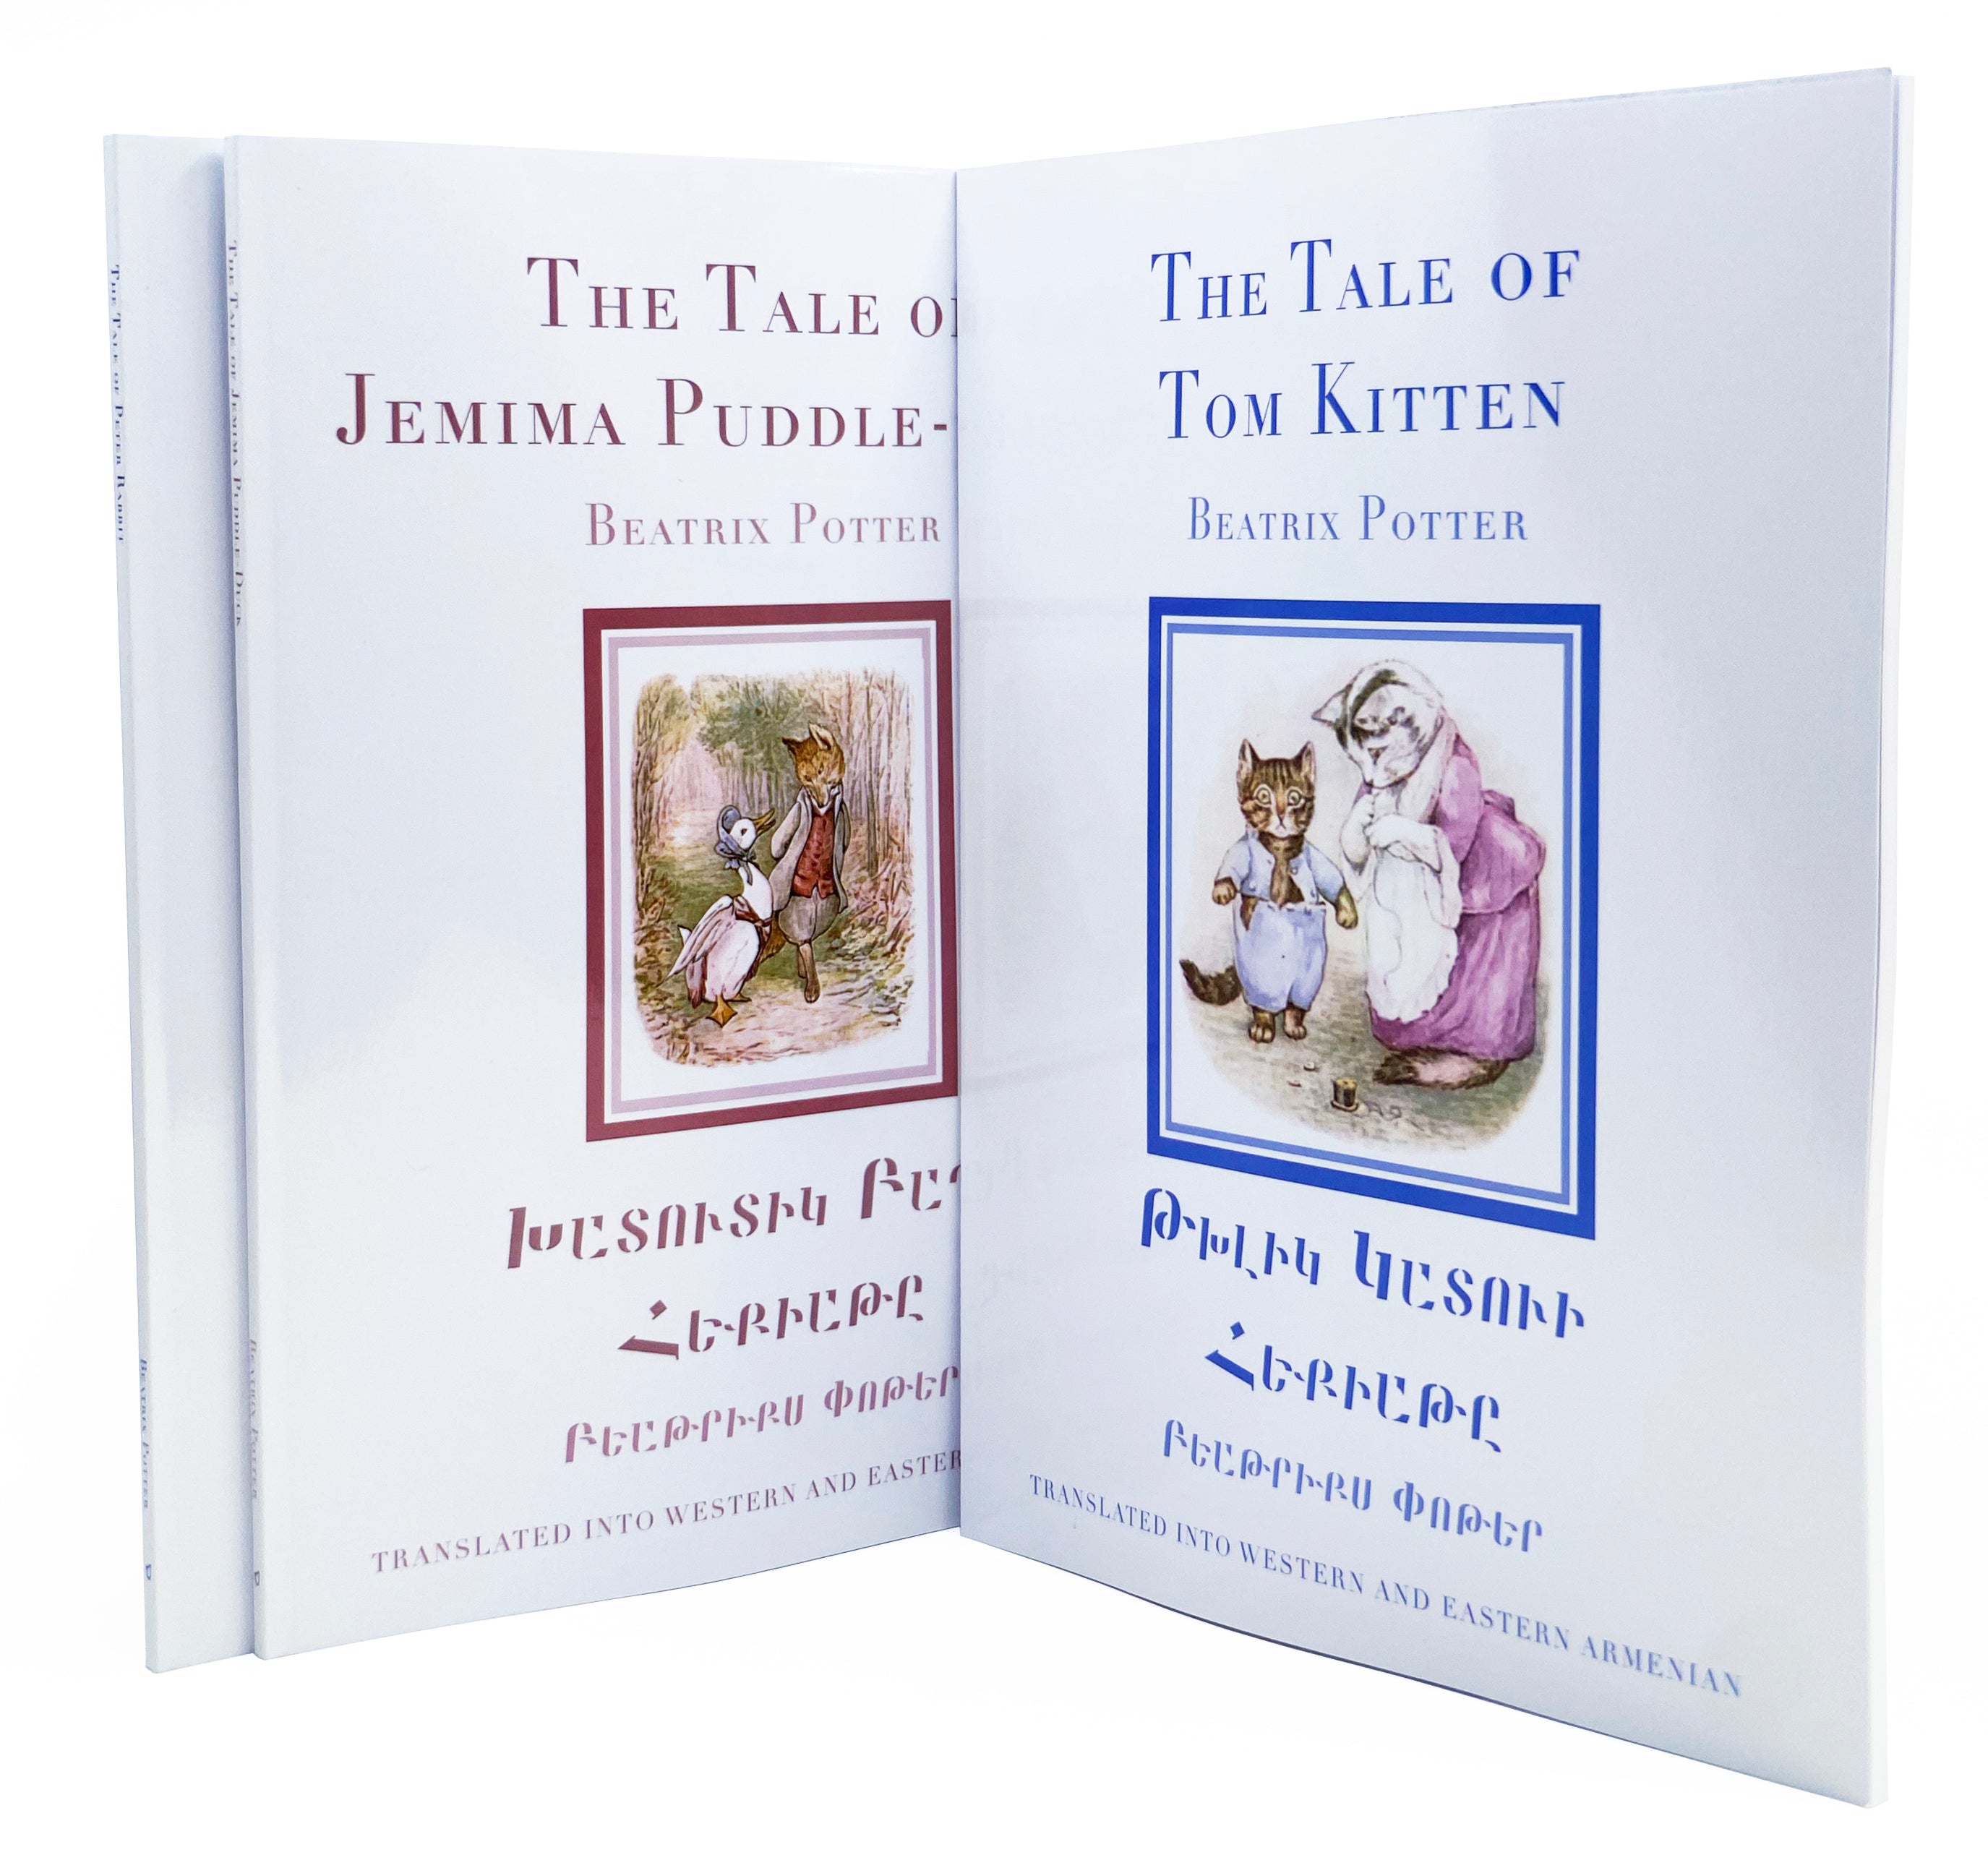 Beatrix Potter Set in Western and Eastern Armenian